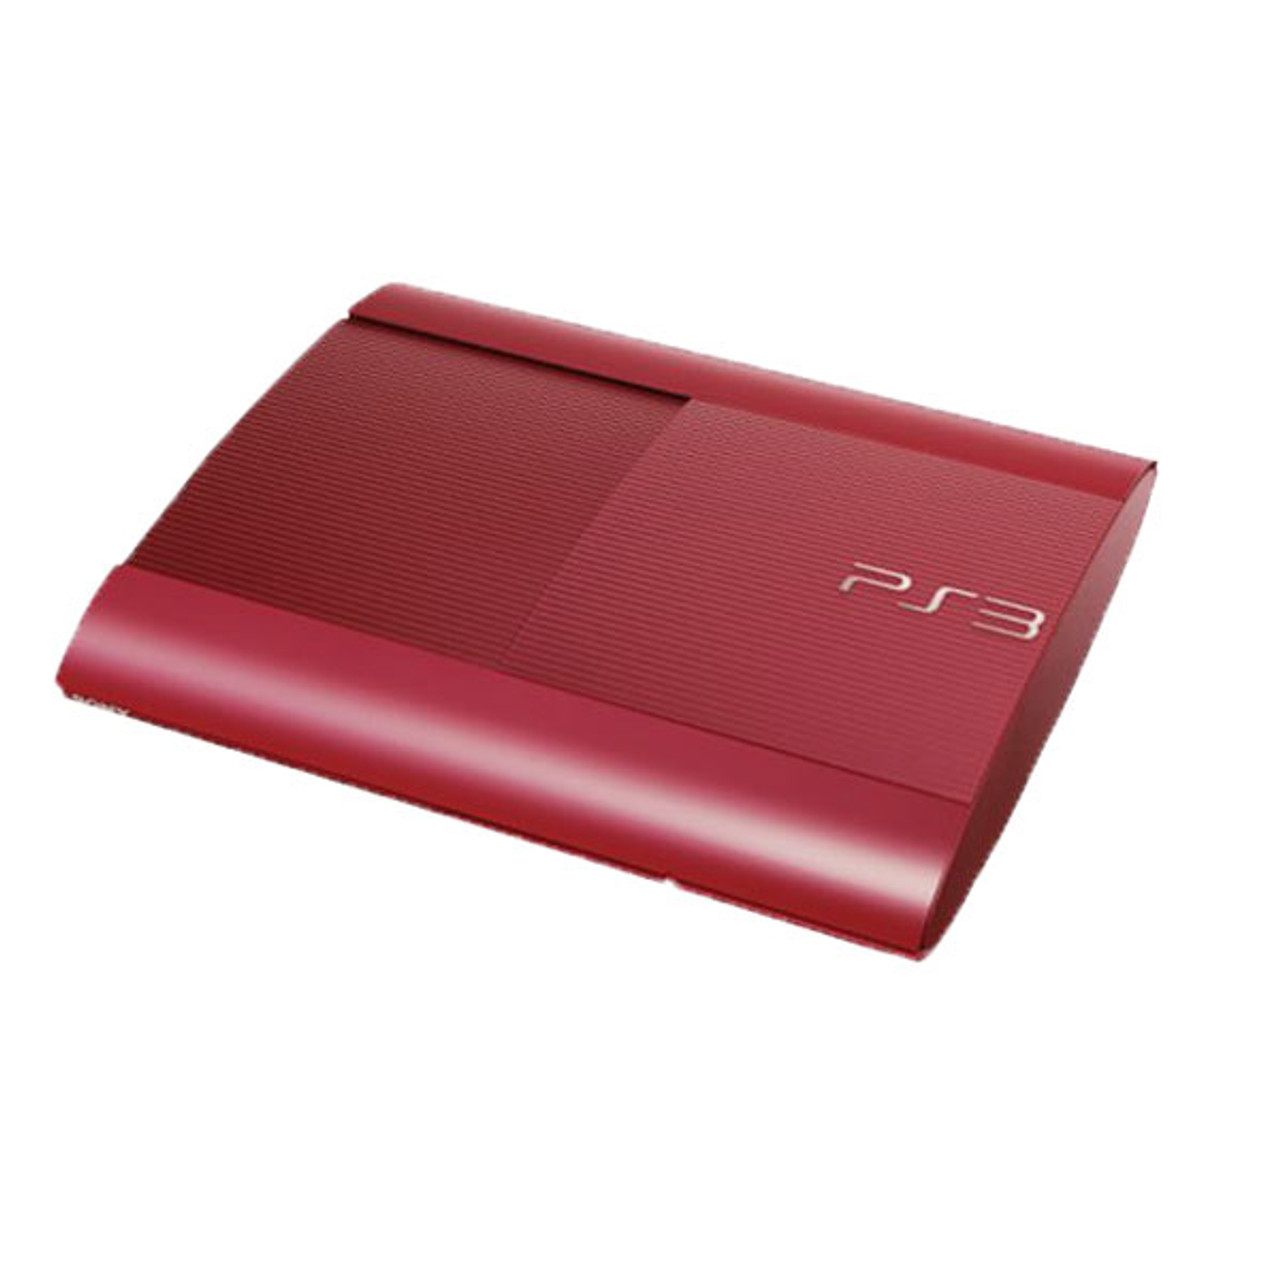 Playstation 3 PS3 Red 500GB Super Slim System Console Only For Sale